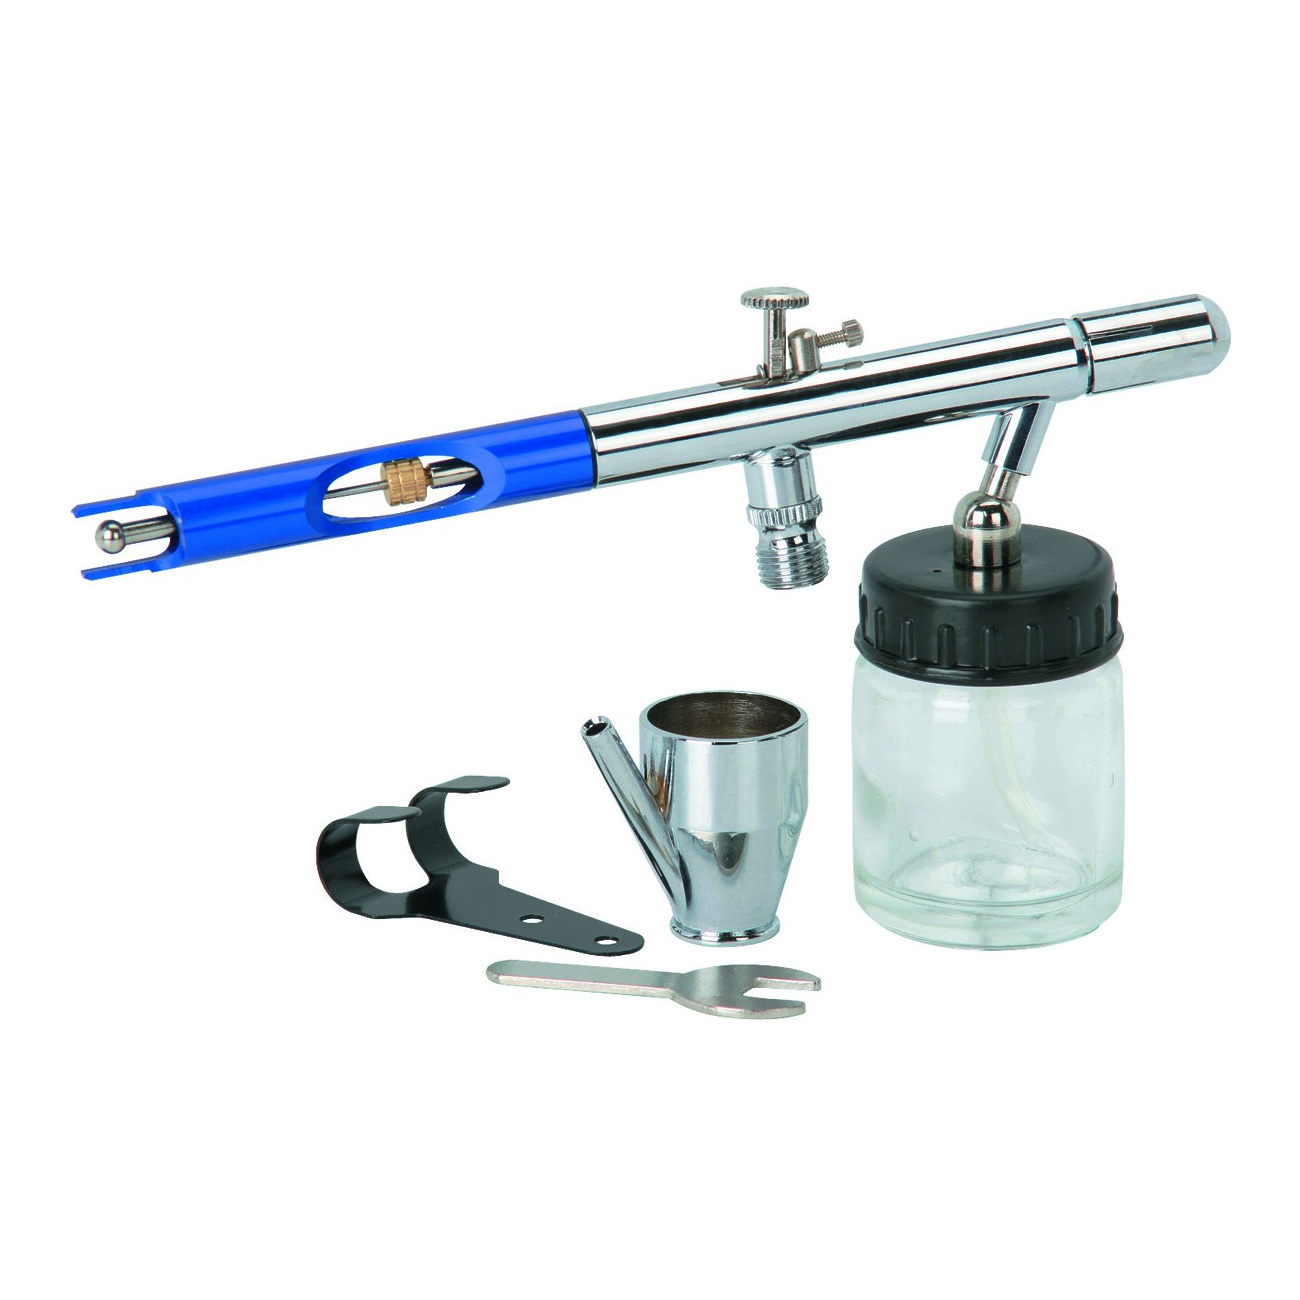 Professional Automotive Touch Up Airbrush Kit